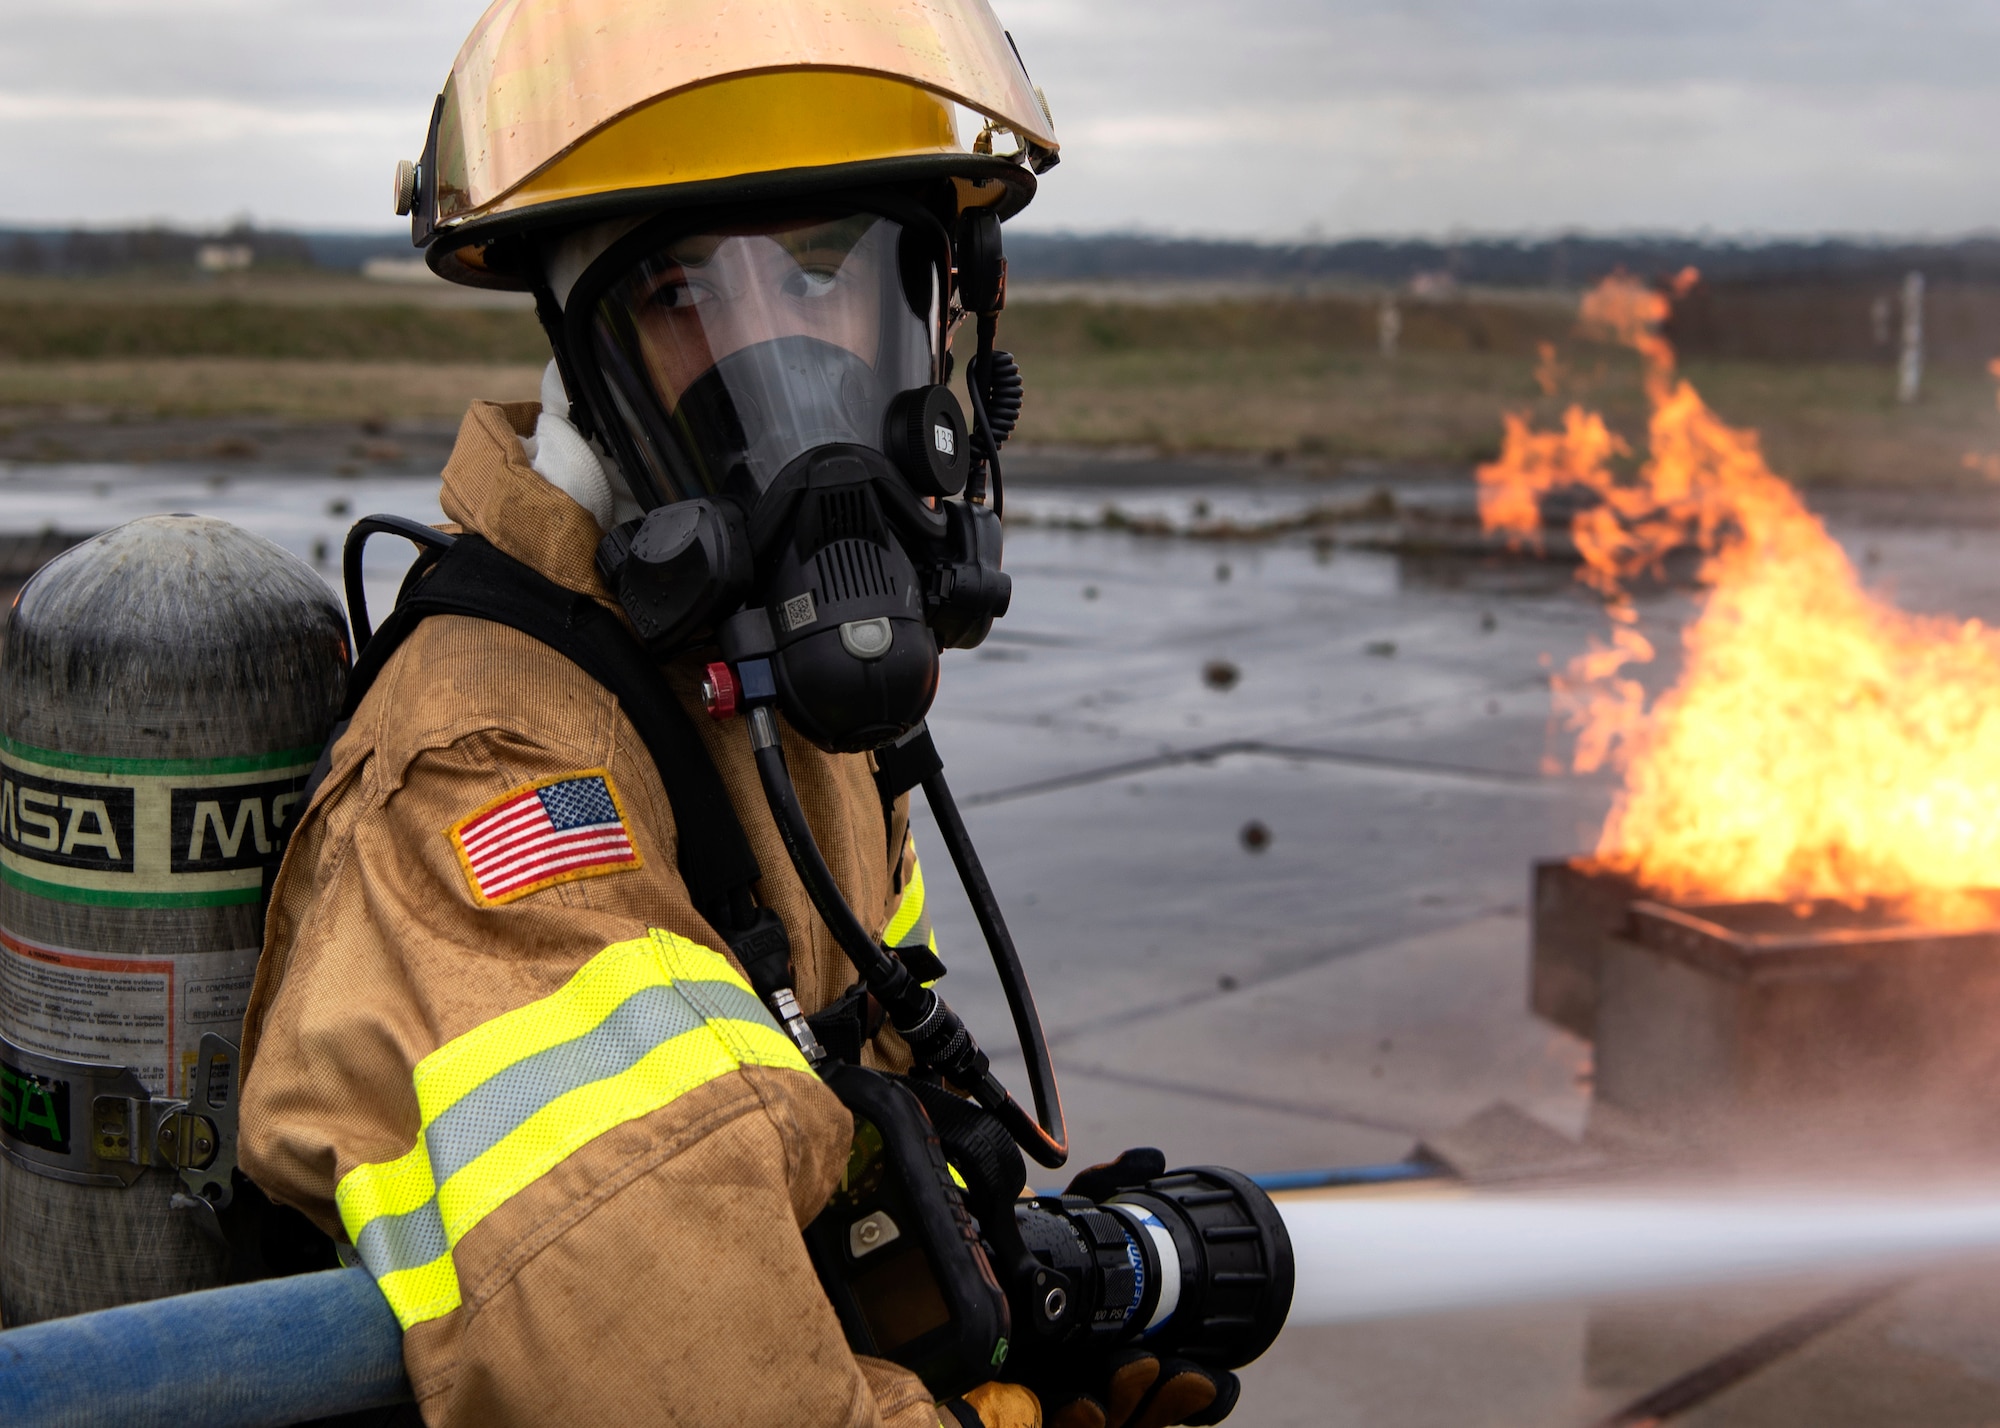 Omar Moylan, a senior at Spangdahlem High School, looks back to his partner for guidance during a live-fire simulated aircraft burn exercise at Spangdahlem Air Base, Germany, March 26, 2019. The exercise was Moylan's first experience extinguishing a live fire. He has been training with the 52nd Civil Engineer Squadron Fire Department for two months and plans to continue until he graduates. (U.S. Air Force photo by Airman 1st Class Valerie Seelye)